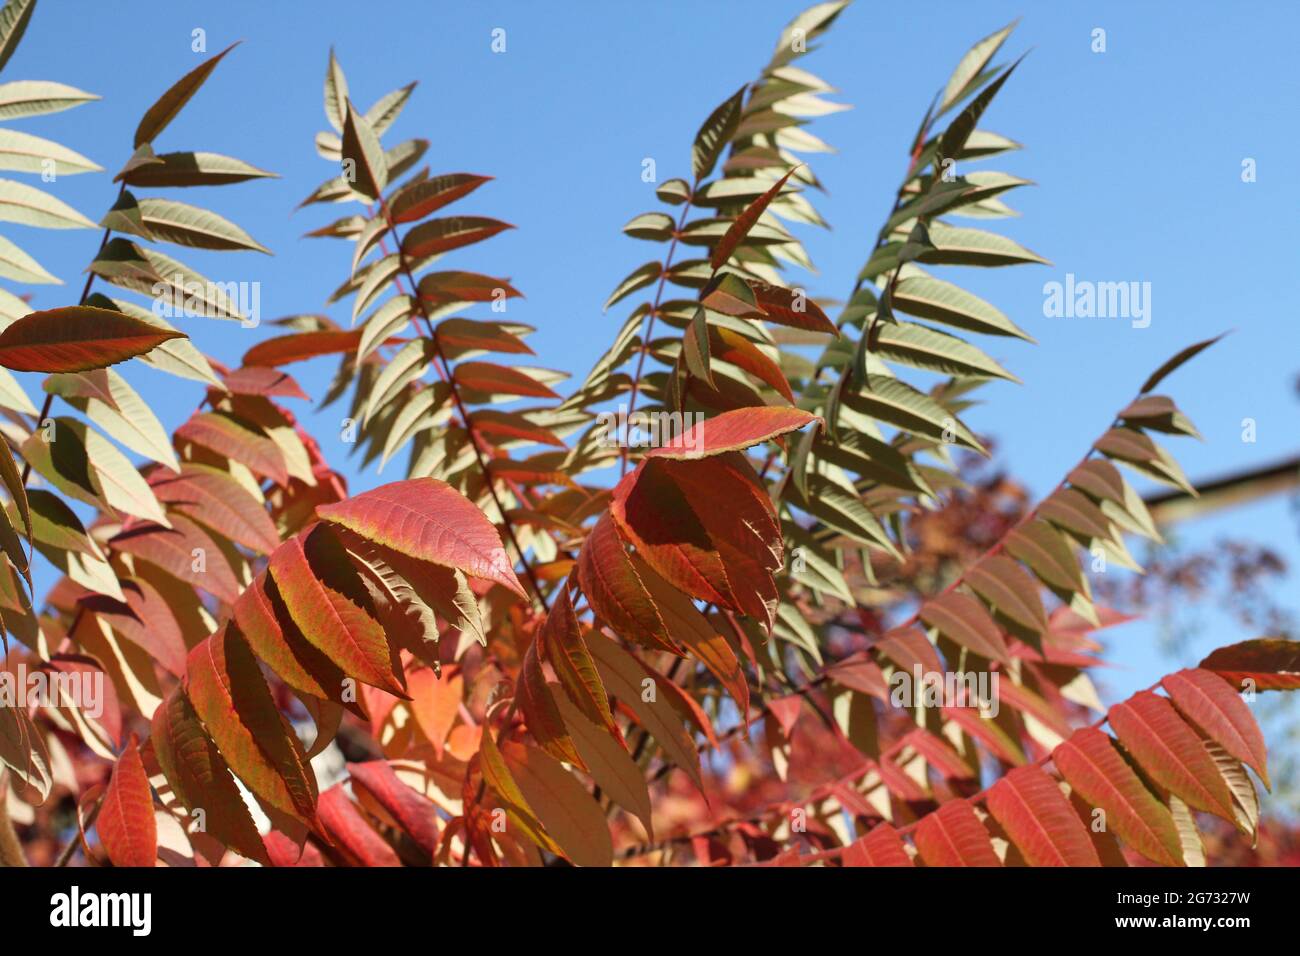 Autumn - purple and red leaves on sumac tree against blue sky Stock Photo